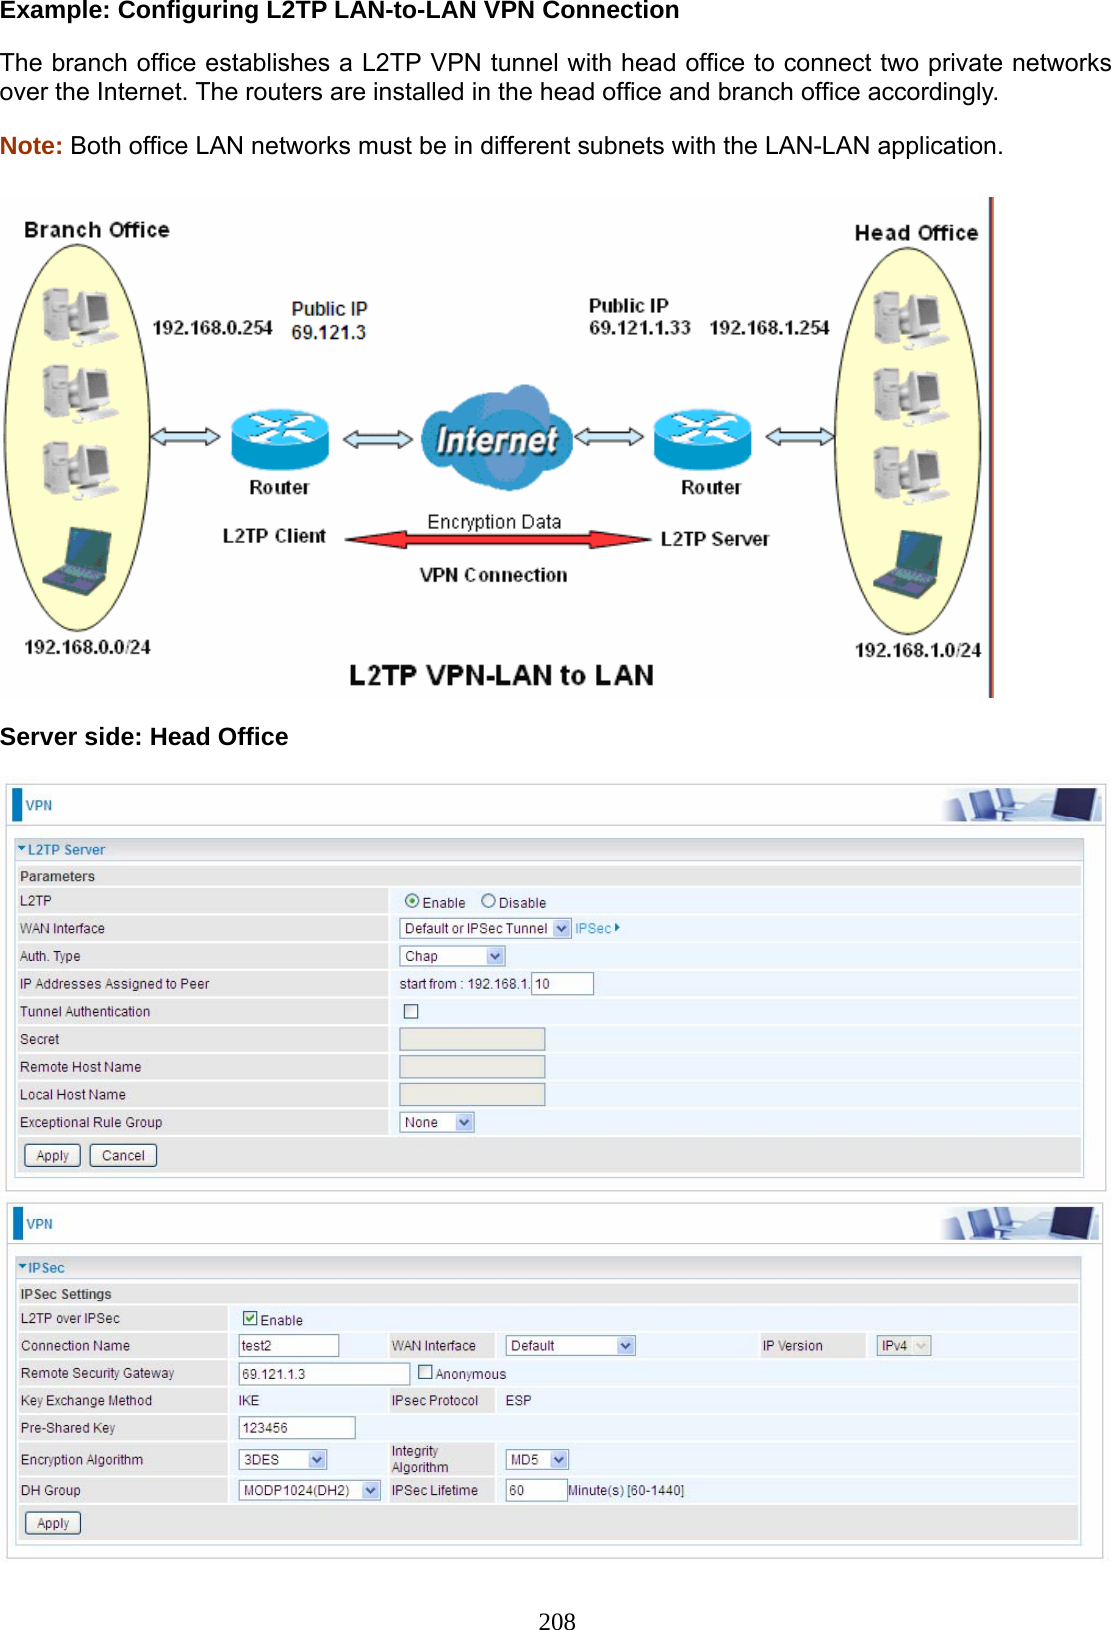 208 Example: Configuring L2TP LAN-to-LAN VPN Connection The branch office establishes a L2TP VPN tunnel with head office to connect two private networks over the Internet. The routers are installed in the head office and branch office accordingly. Note: Both office LAN networks must be in different subnets with the LAN-LAN application.    Server side: Head Office    